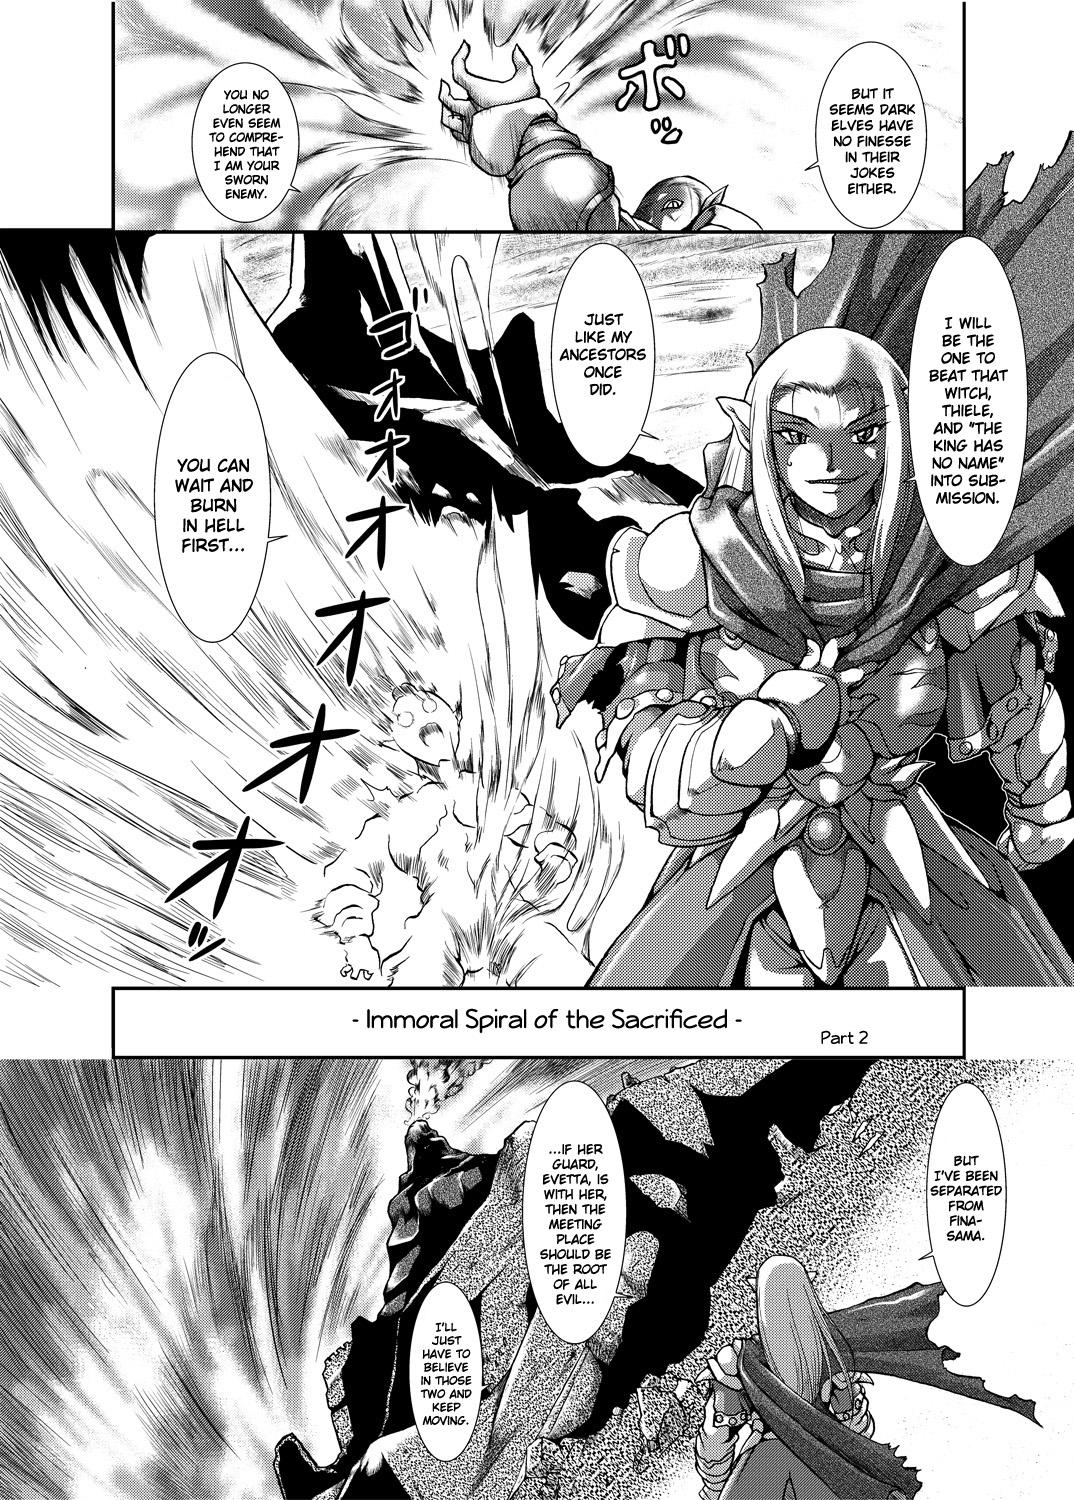 Her Kakugee Zanmai 7 | Spiral of Conflict 2 - Chaos breaker Punished - Page 5